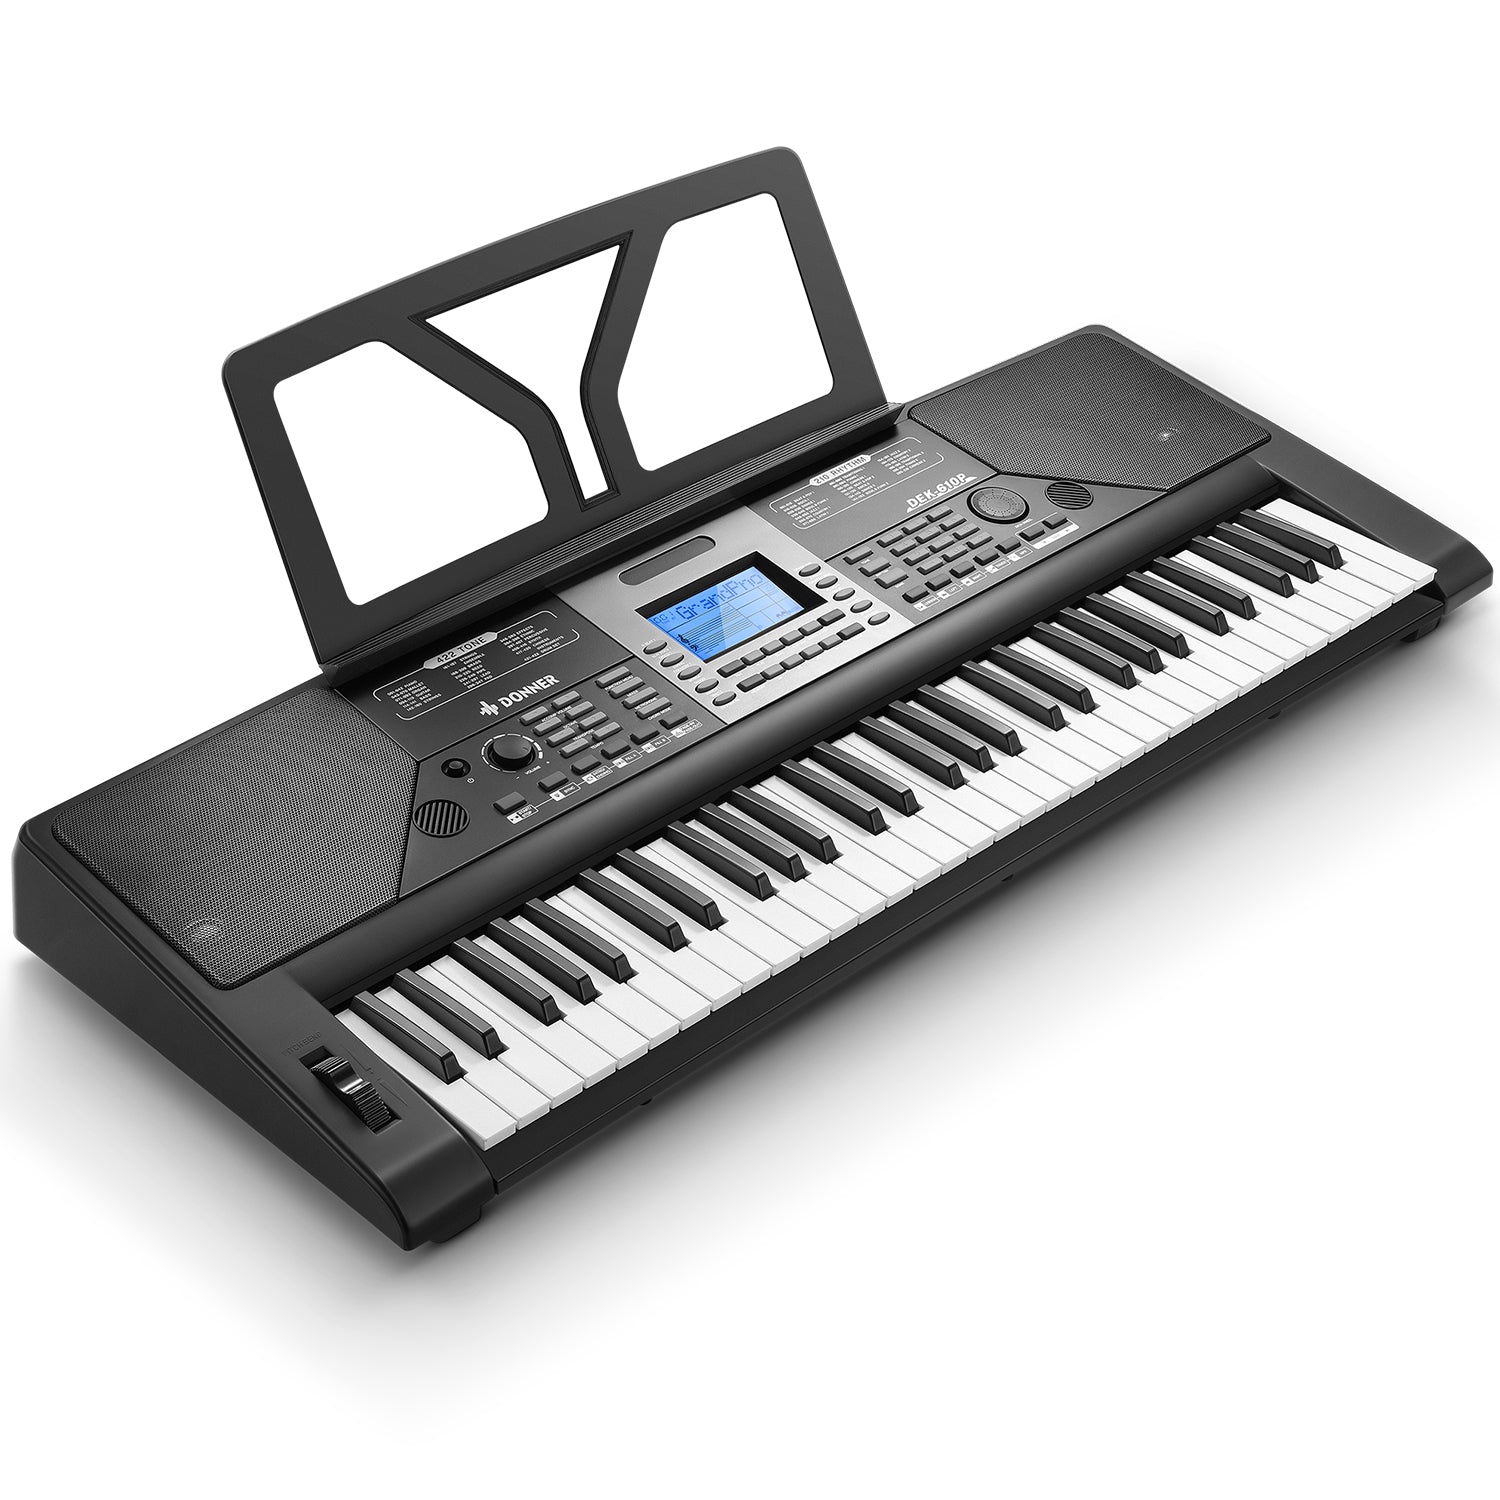 

Donner DEK-610P 61 Key Full-Size Force-Sensitive Electronic Keyboard with MIDI Mixer Function LCD Display